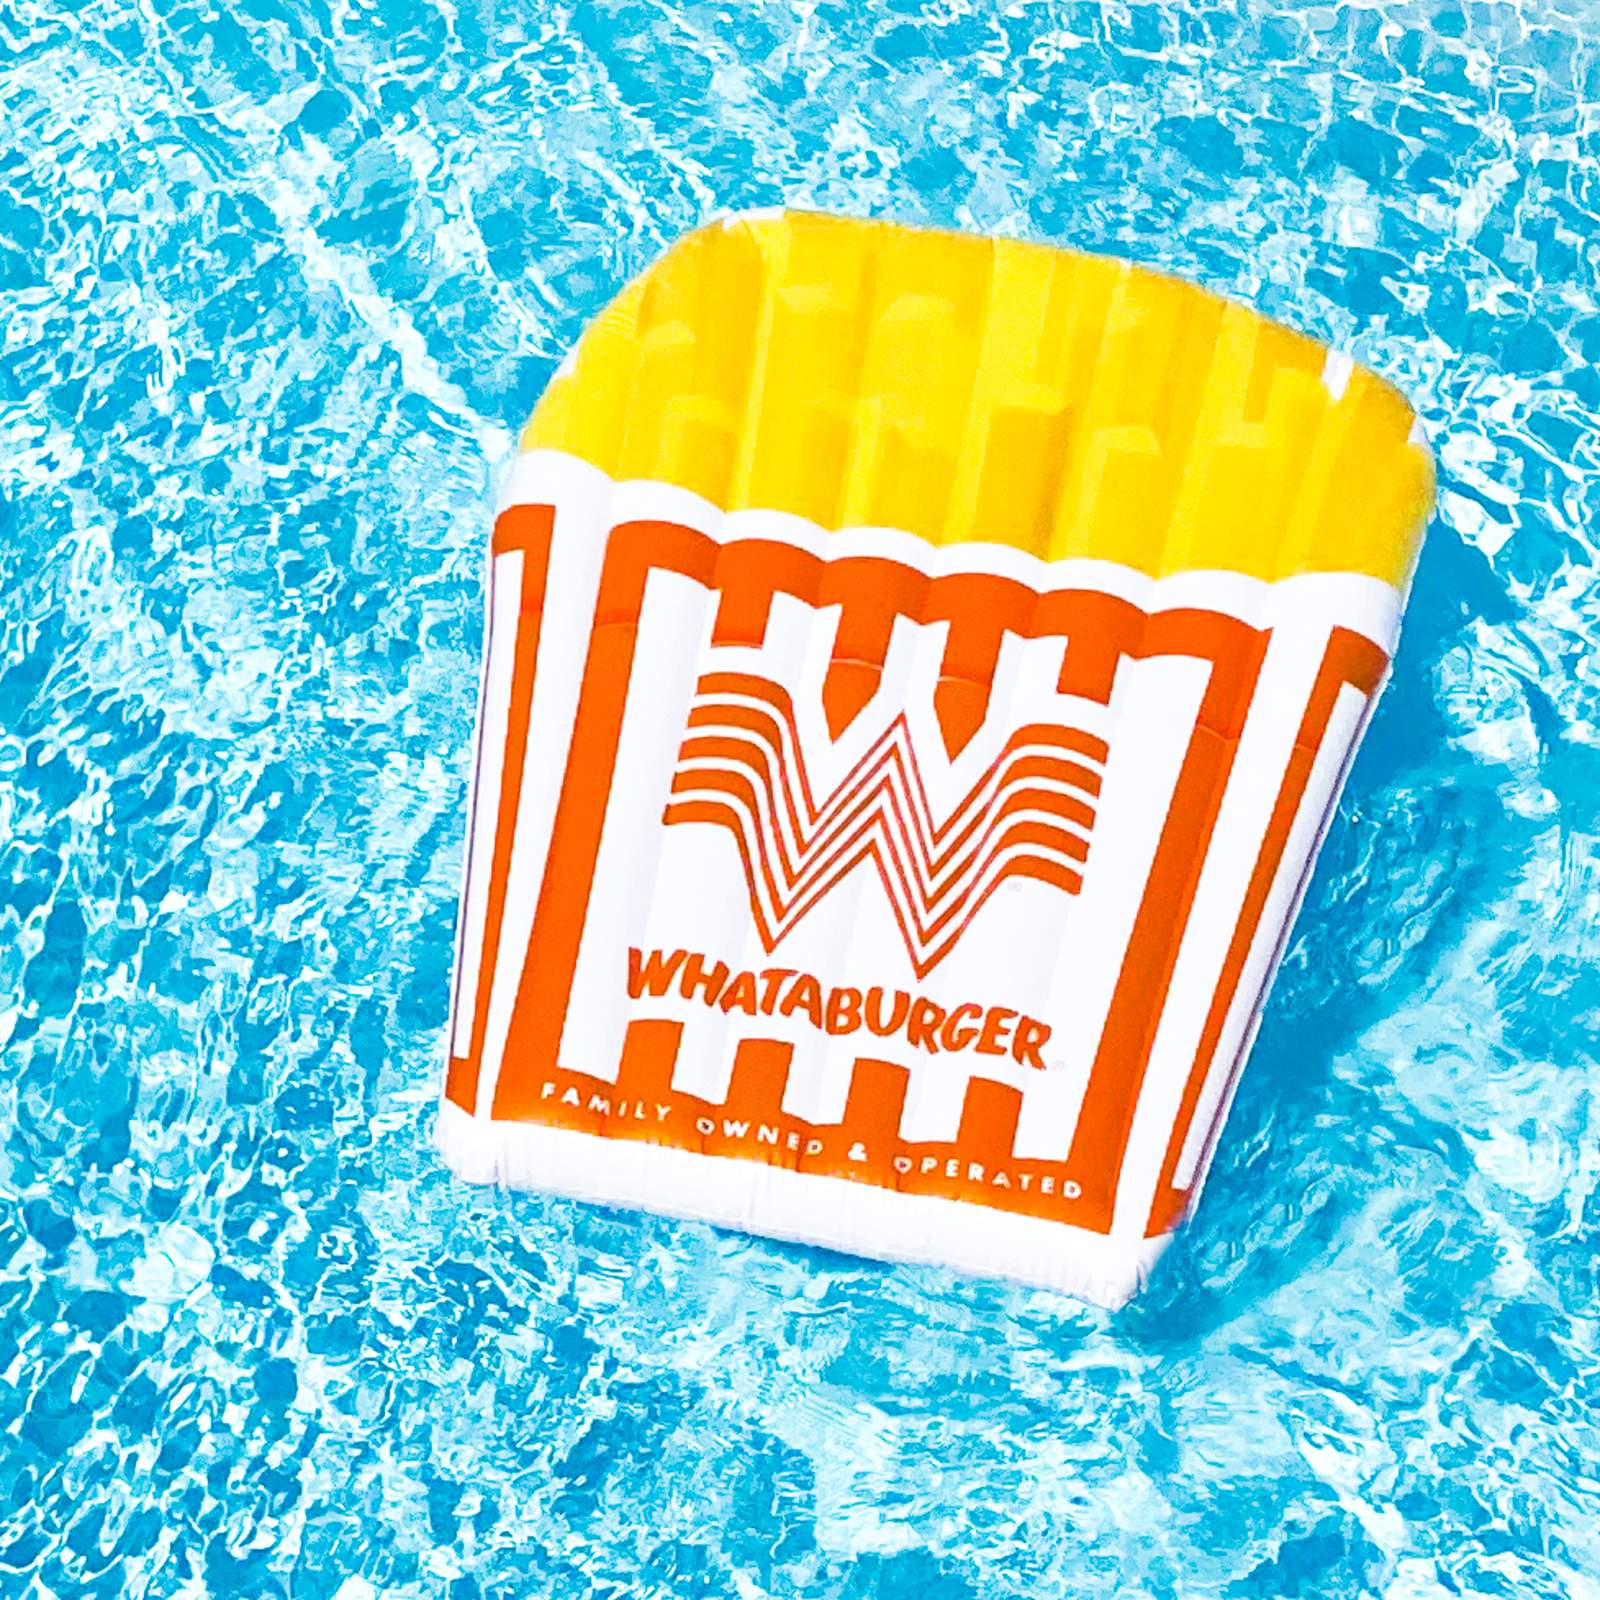 Floating fries: Whataburger releases line of summertime products